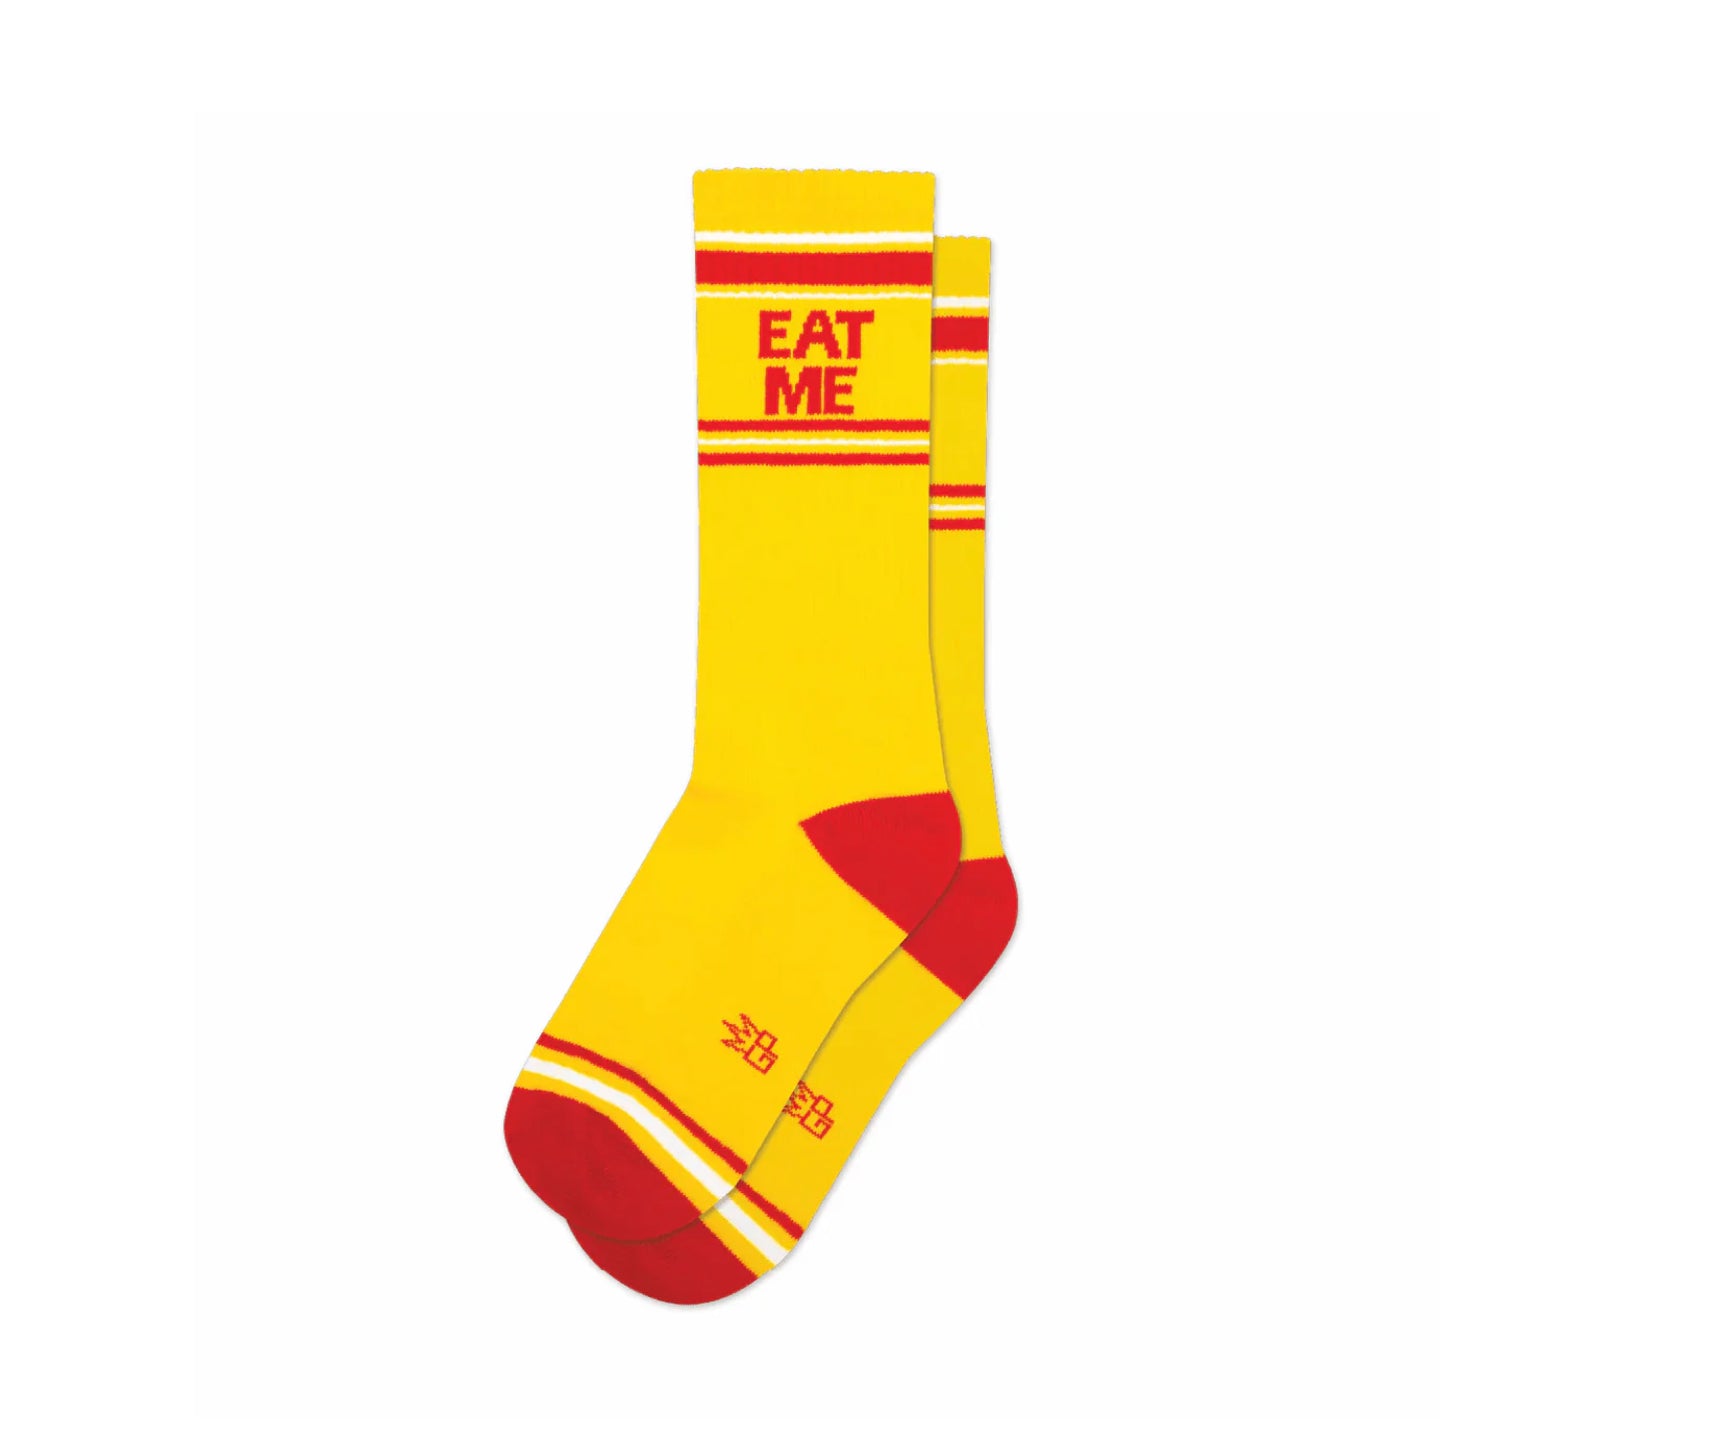 A pair of yellow and red crew socks that read "eat me" with the Gumball Poodle logo on the arch.